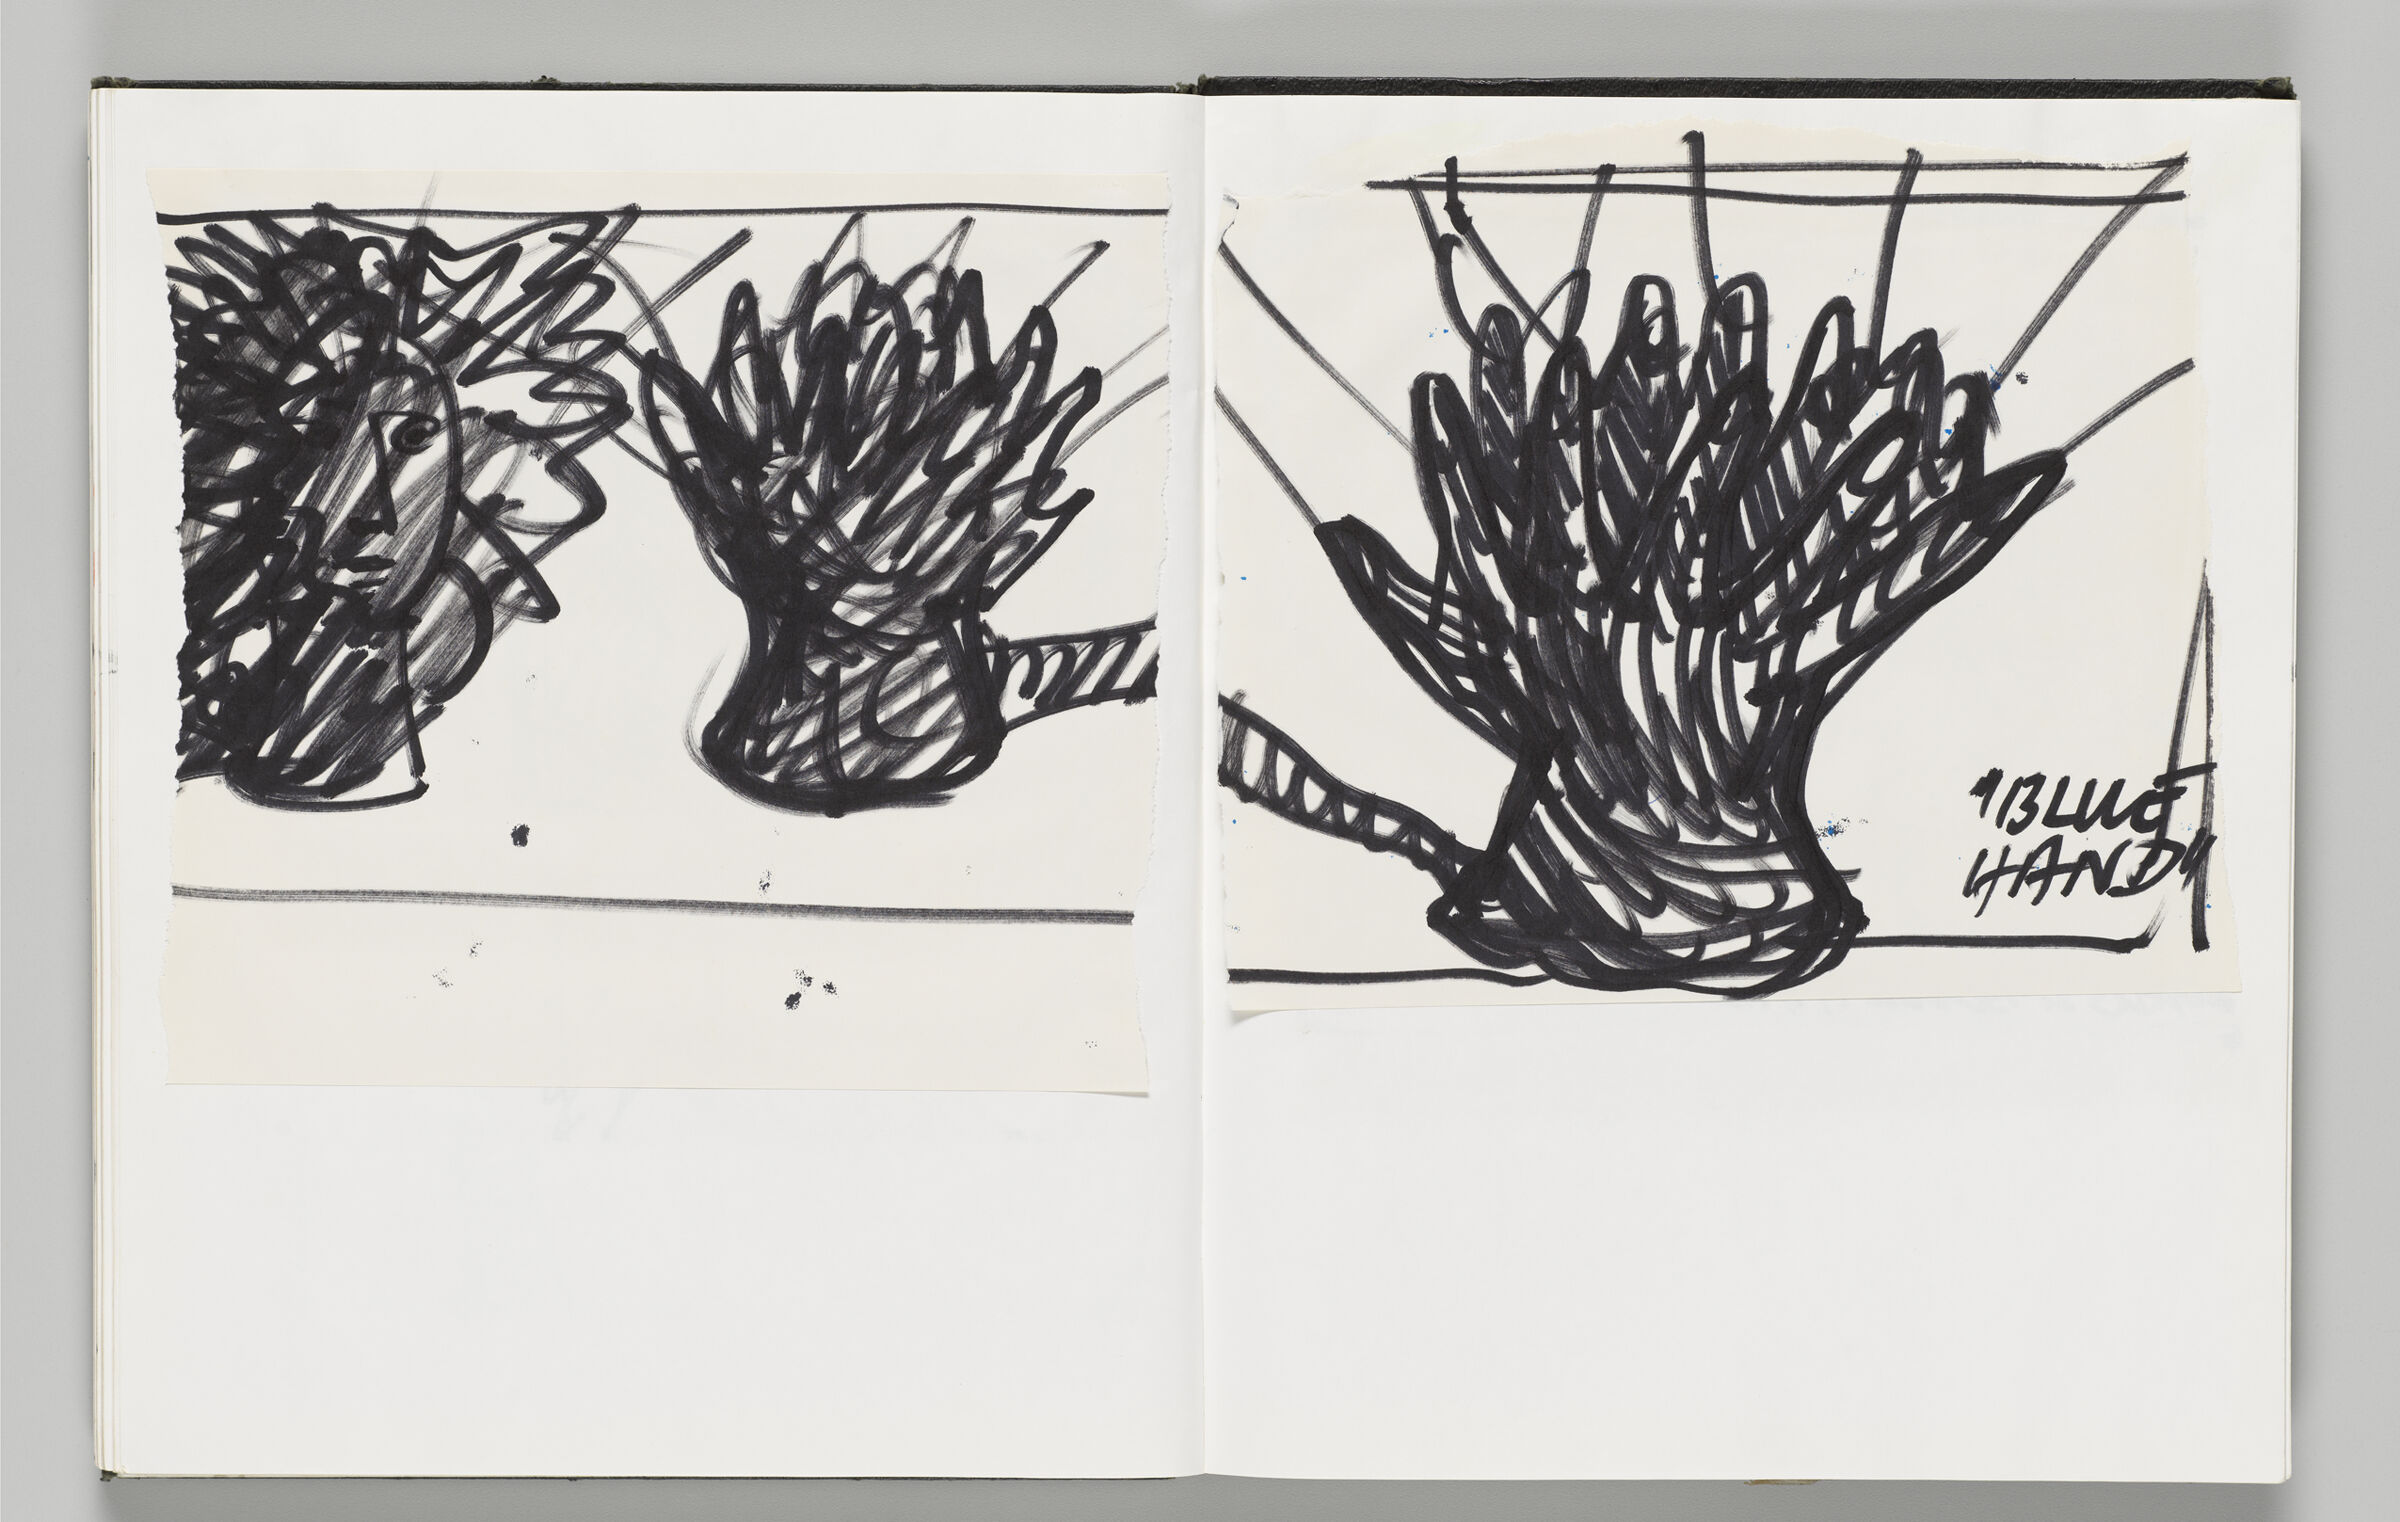 Untitled (Adhered Icarus Sketches, Left Page); Untitled (Adhered Blue Hand Sketch, Right Page)